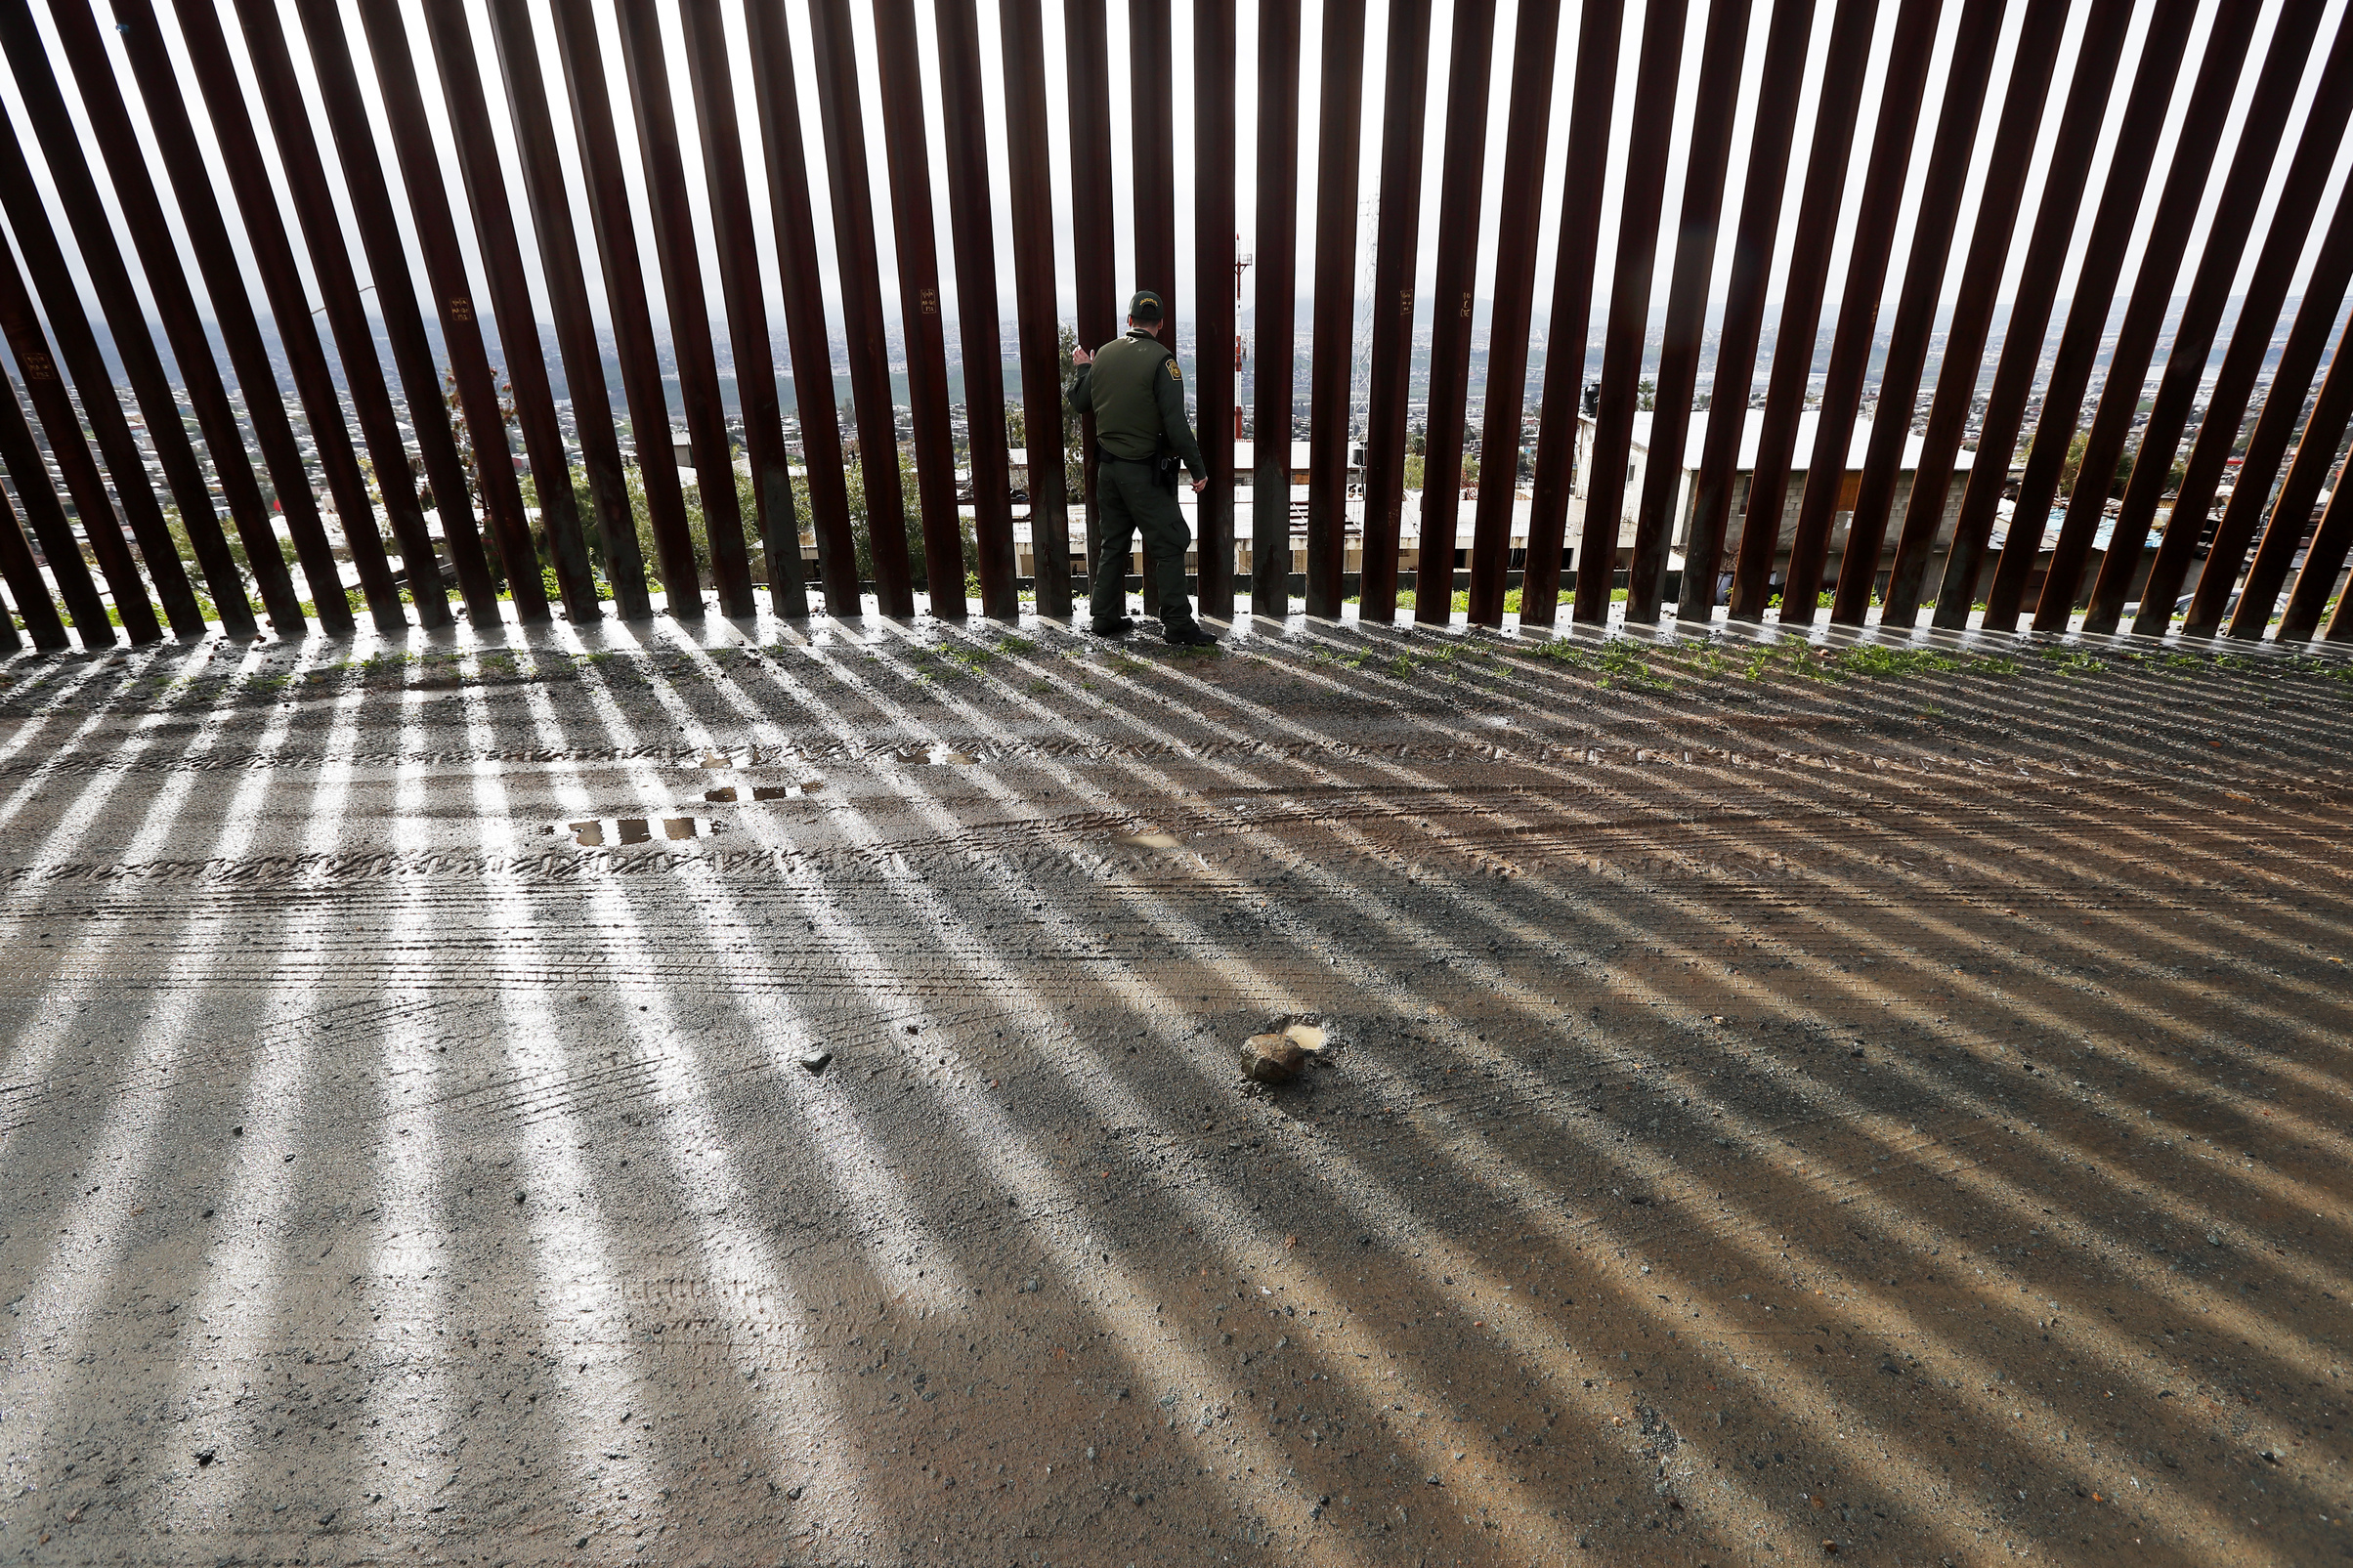 PHOTO: Border Patrol agent Vincent Pirro touches a section of the border wall separating Tijuana, Mexico, behind, from San Diego, Feb. 5, 2019, in San Diego.